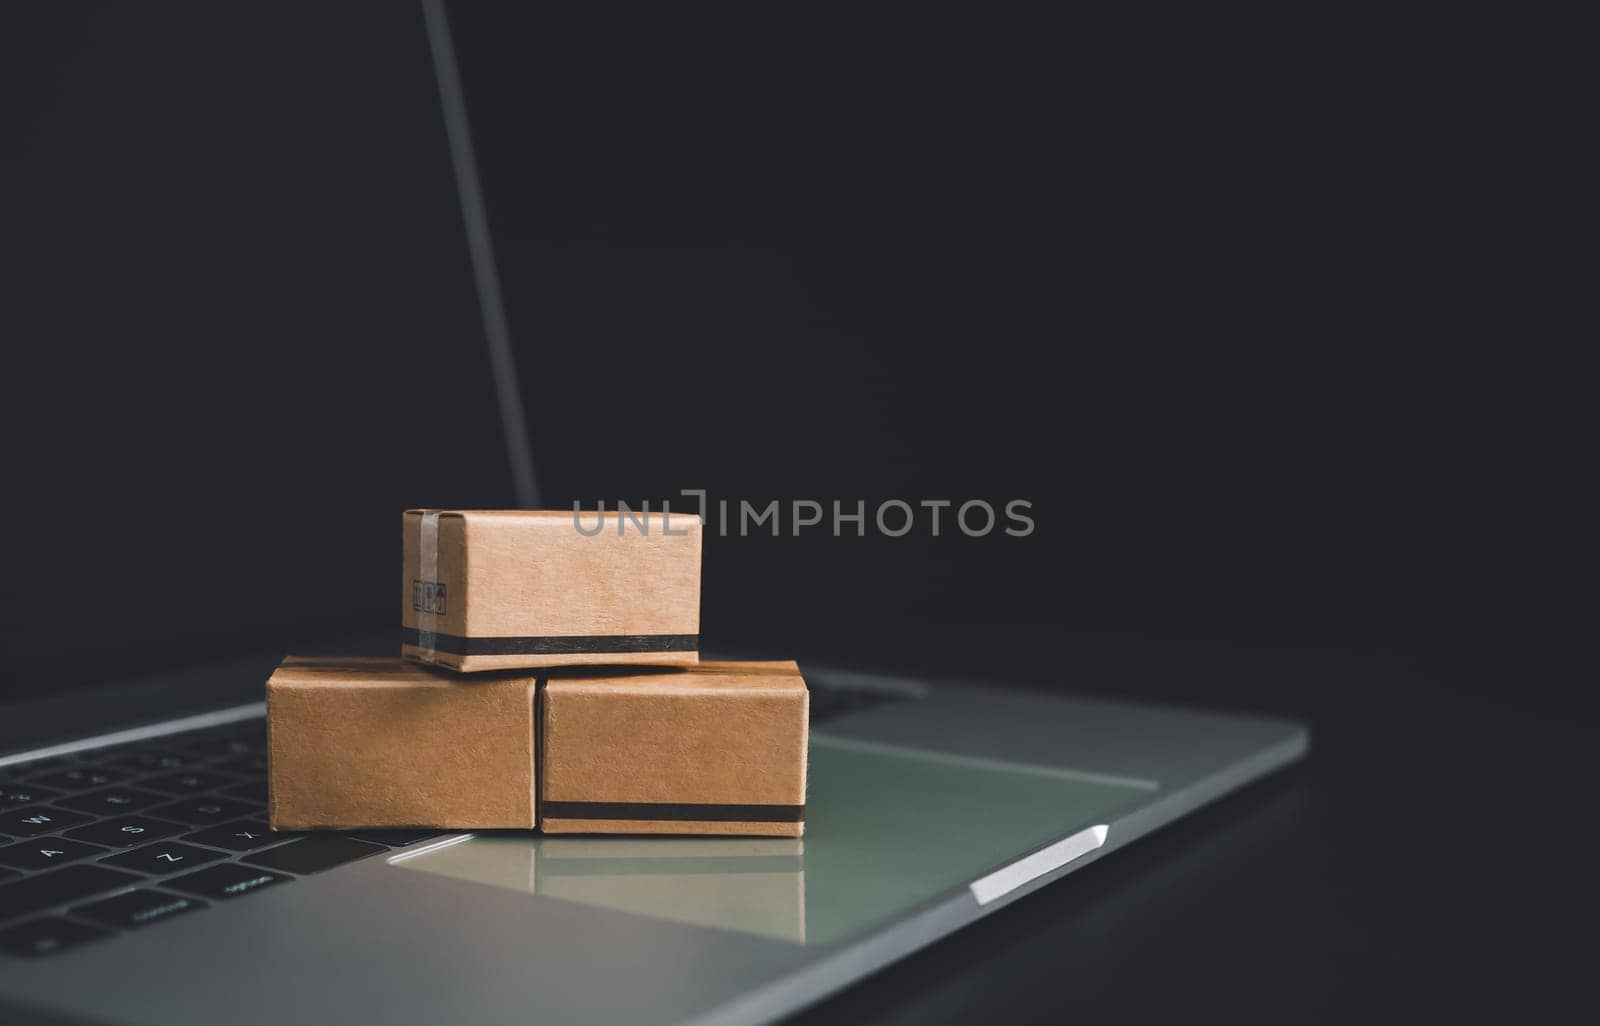 Boxes on a laptop keyboard on dark background. Ideas about online shopping, online shopping is a form of electronic commerce that allows consumers to directly buy goods from seller over the internet.